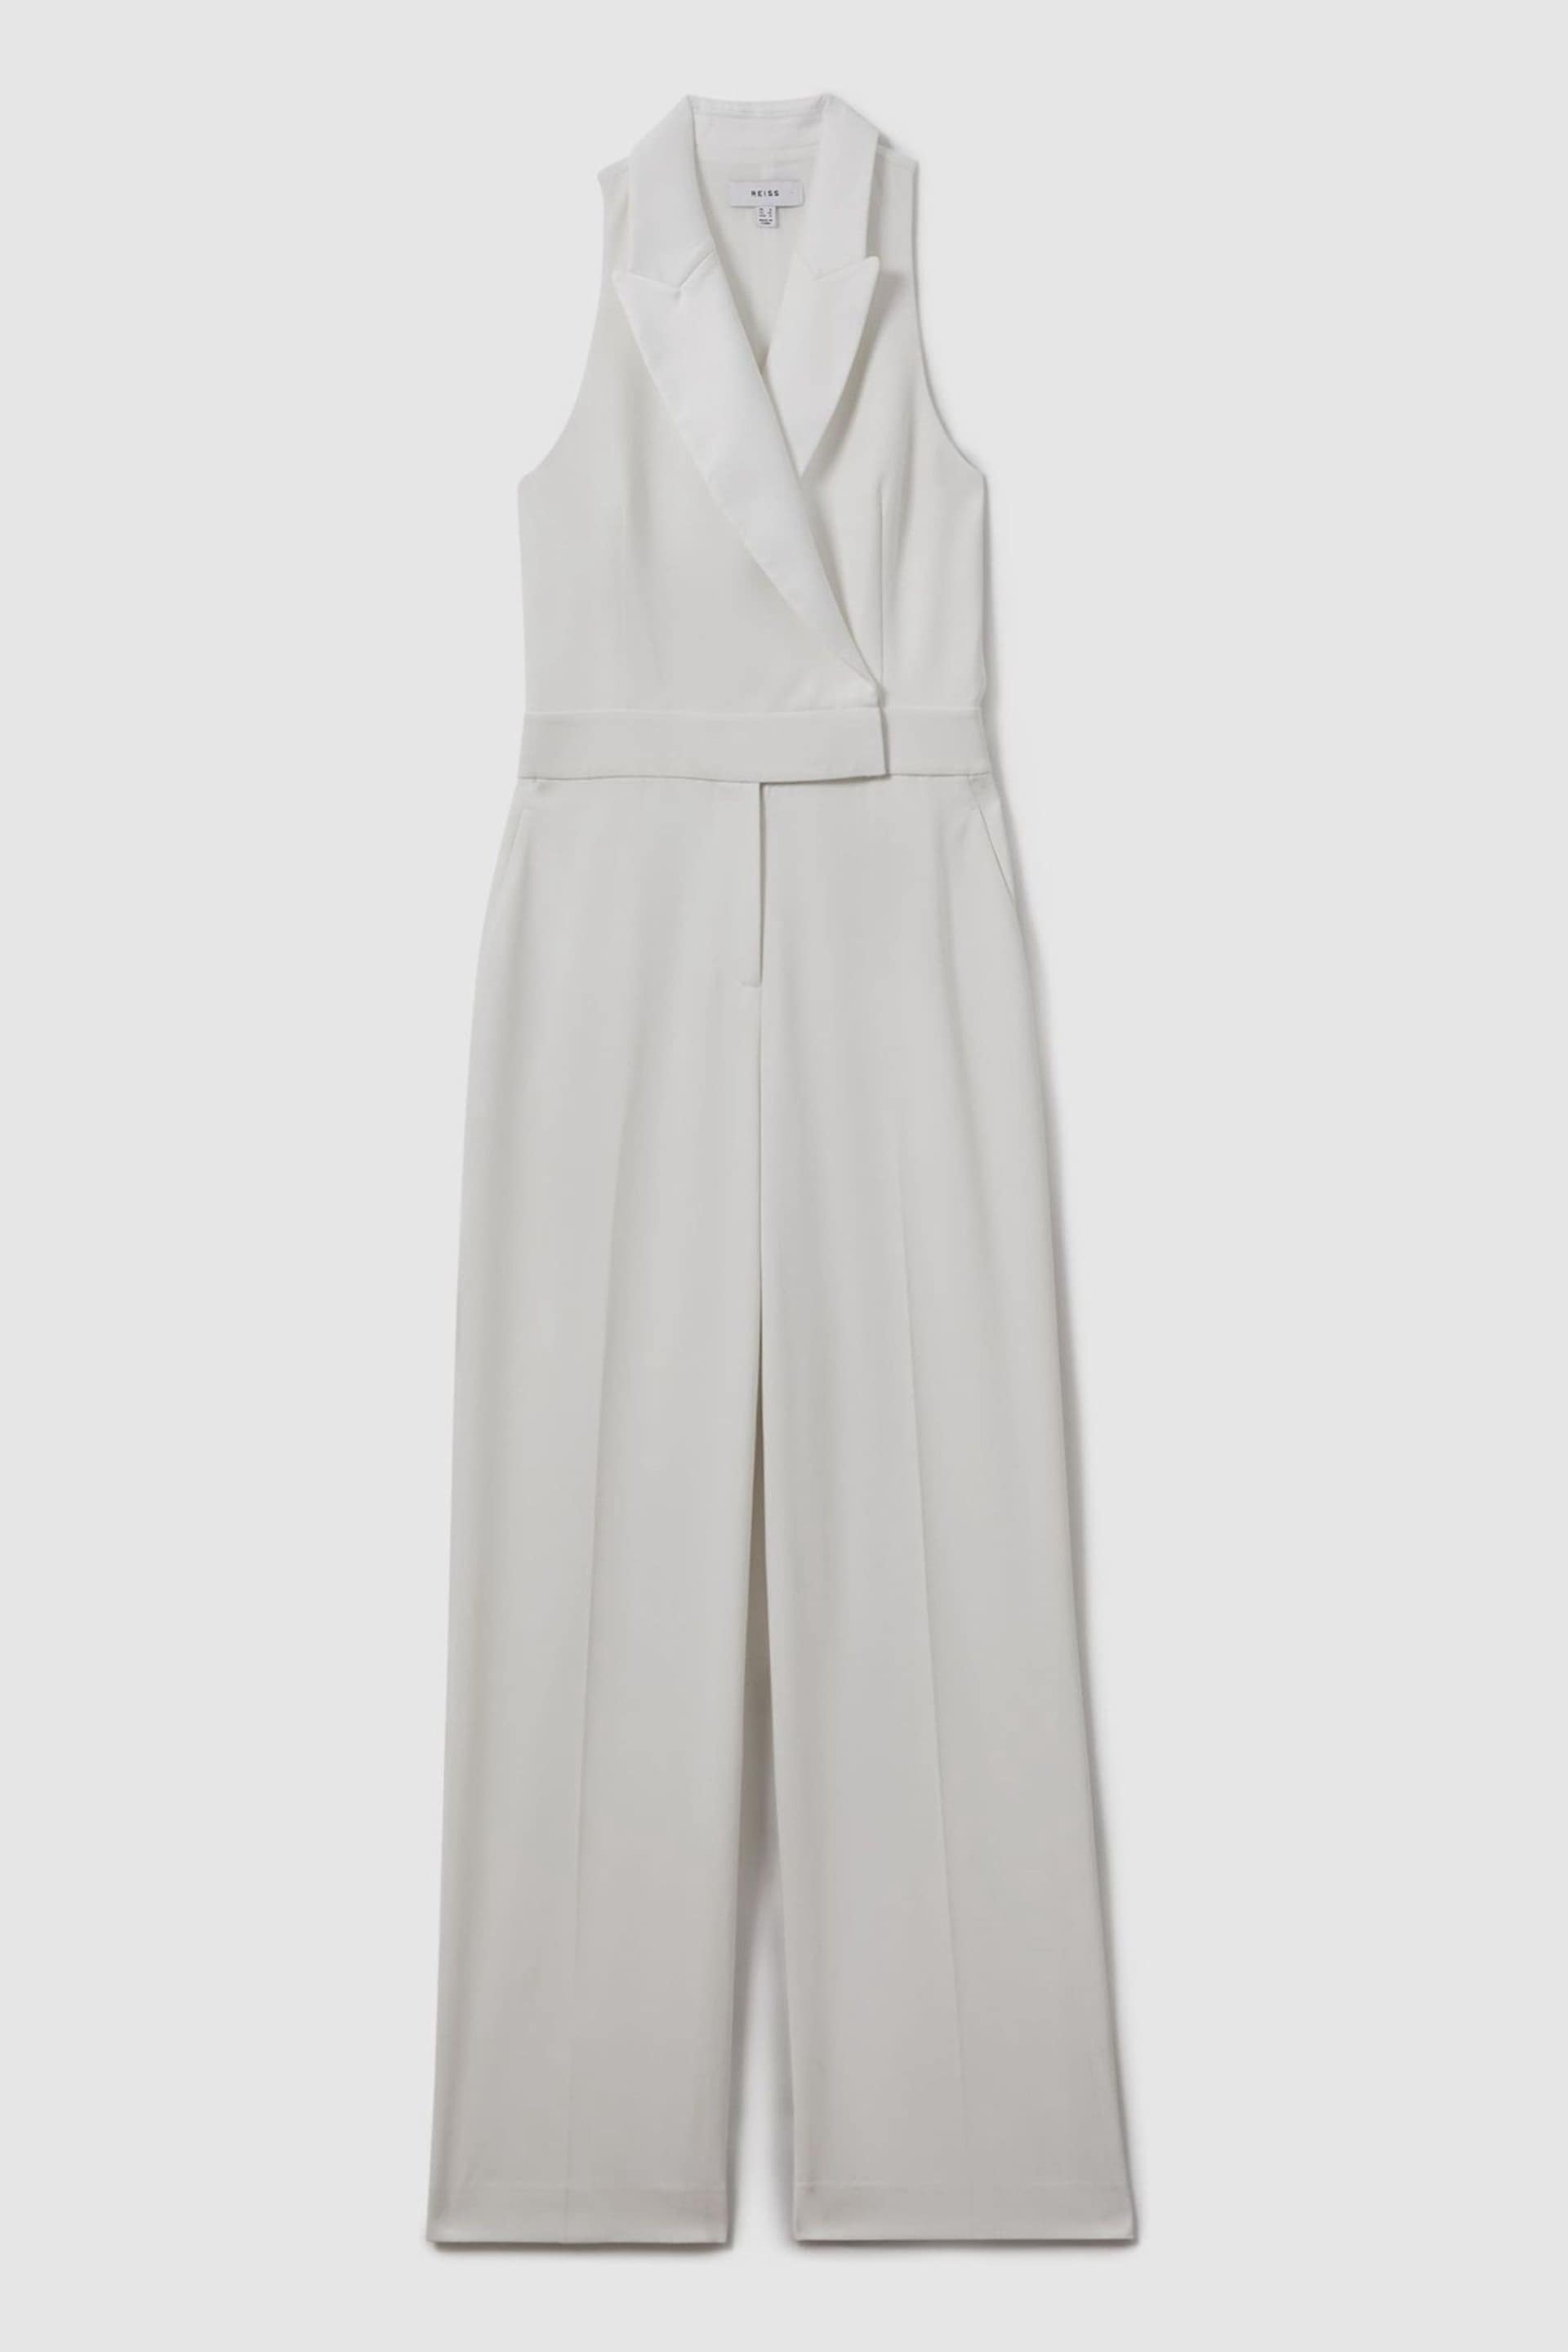 Reiss White Lainey Double Breasted Satin Tux Jumpsuit - Image 2 of 6